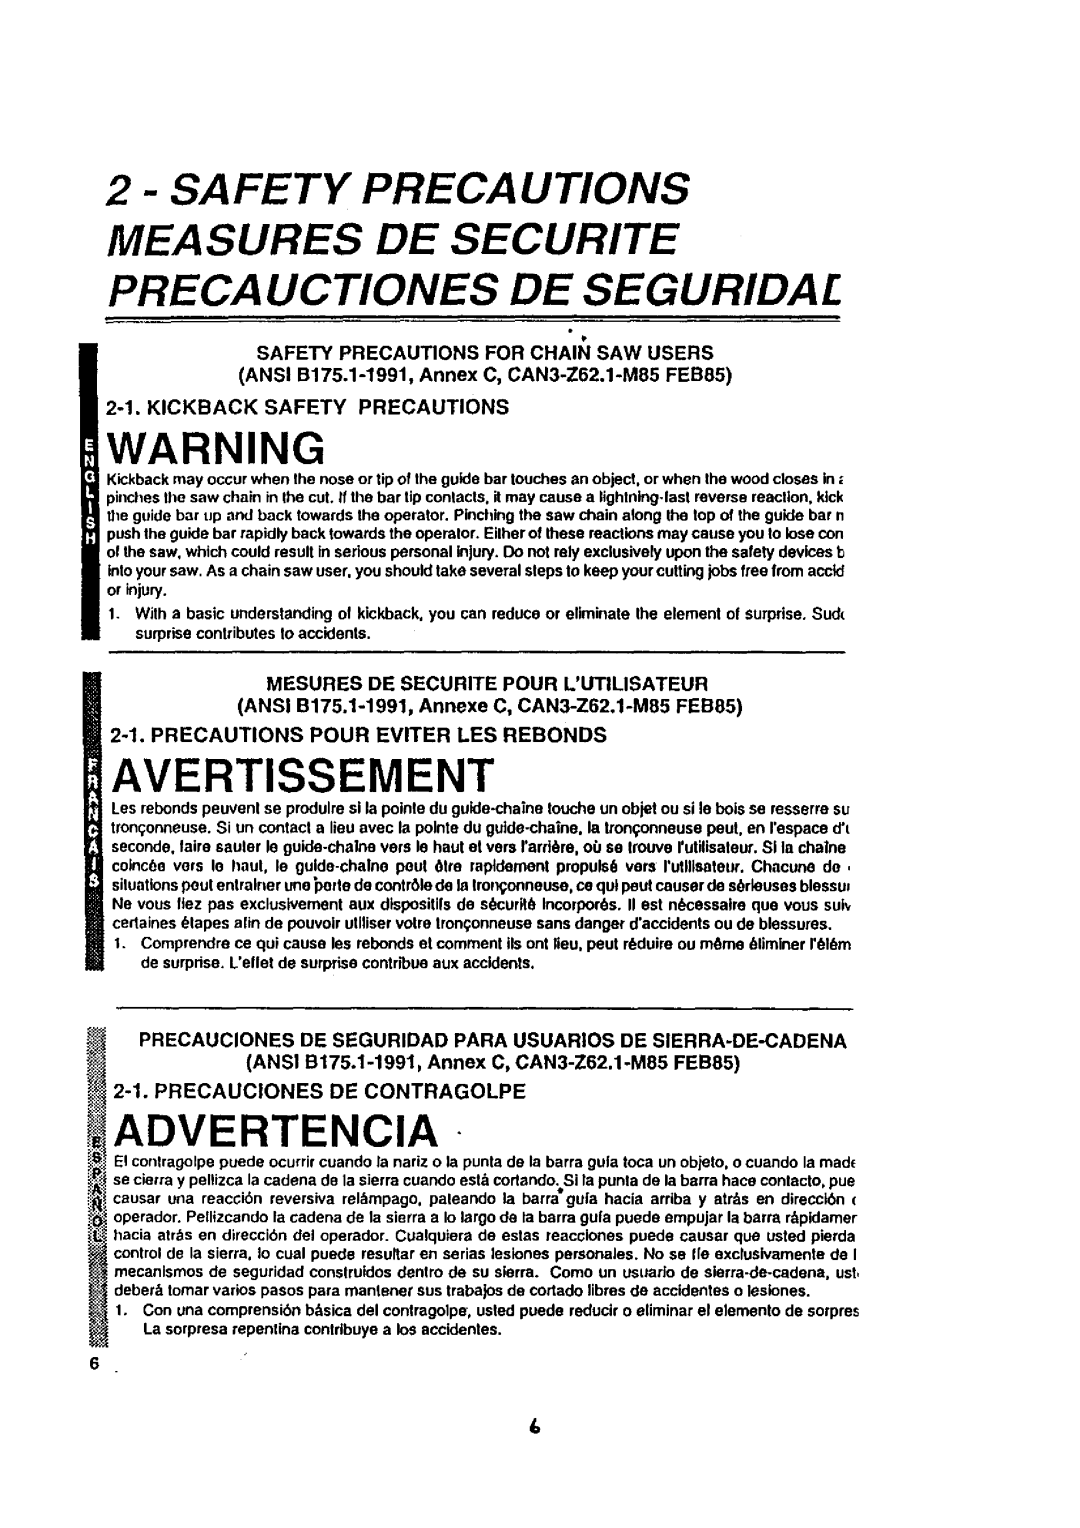 McCulloch MACE3210 Avertissement, Safety Precautions For Chain Saw Users, ANSI B175.1-1991,Annex C, CAN3-Z62.1-M85FEB85 